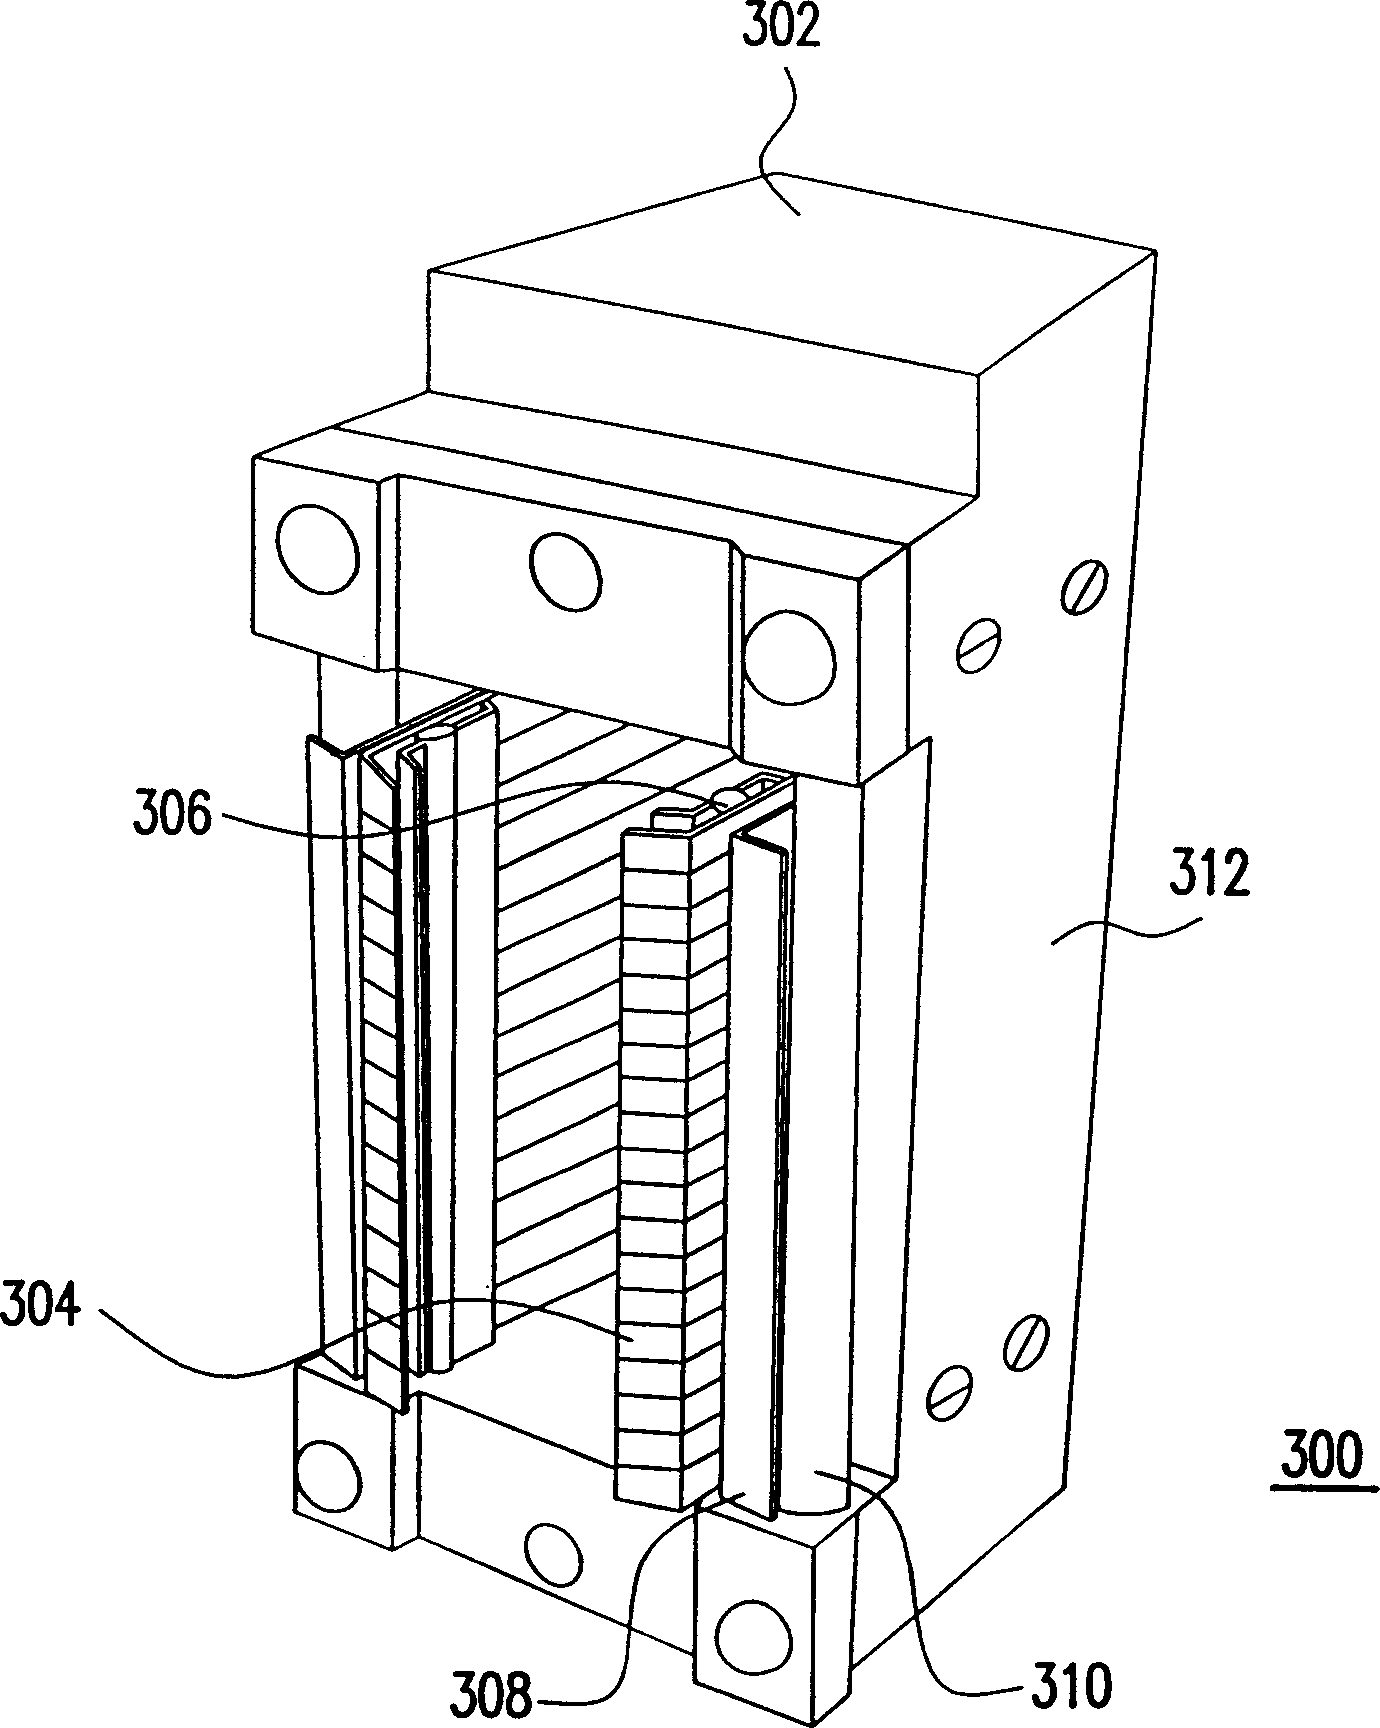 Dual in-line package type double-contact text fixture